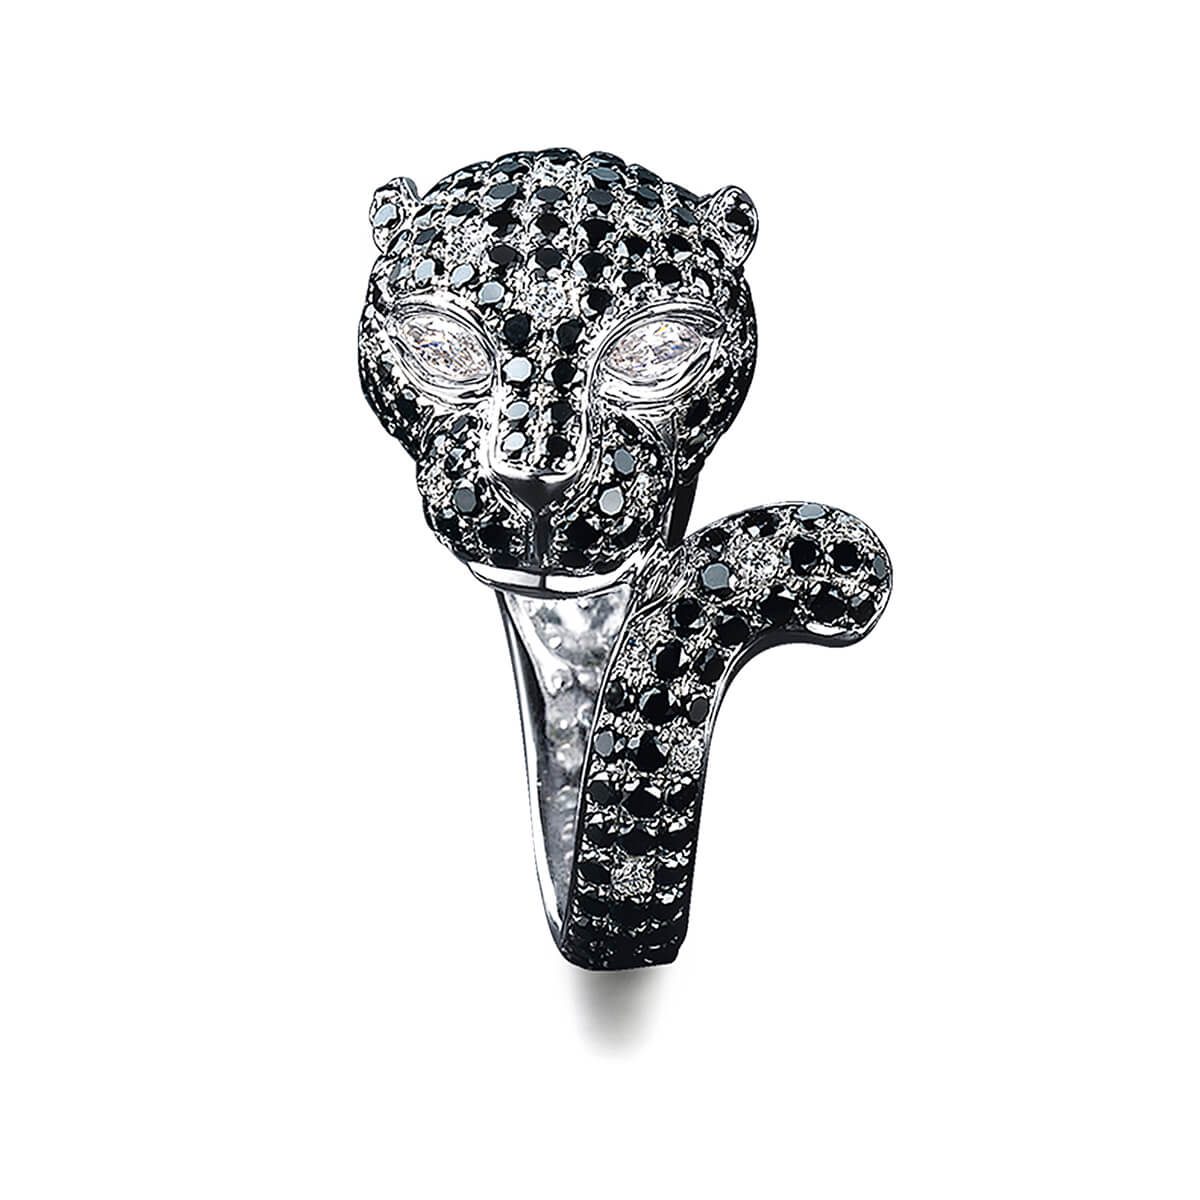 Black and White Diamond Panther Ring 3.9 TCW In 18K White Gold Front View